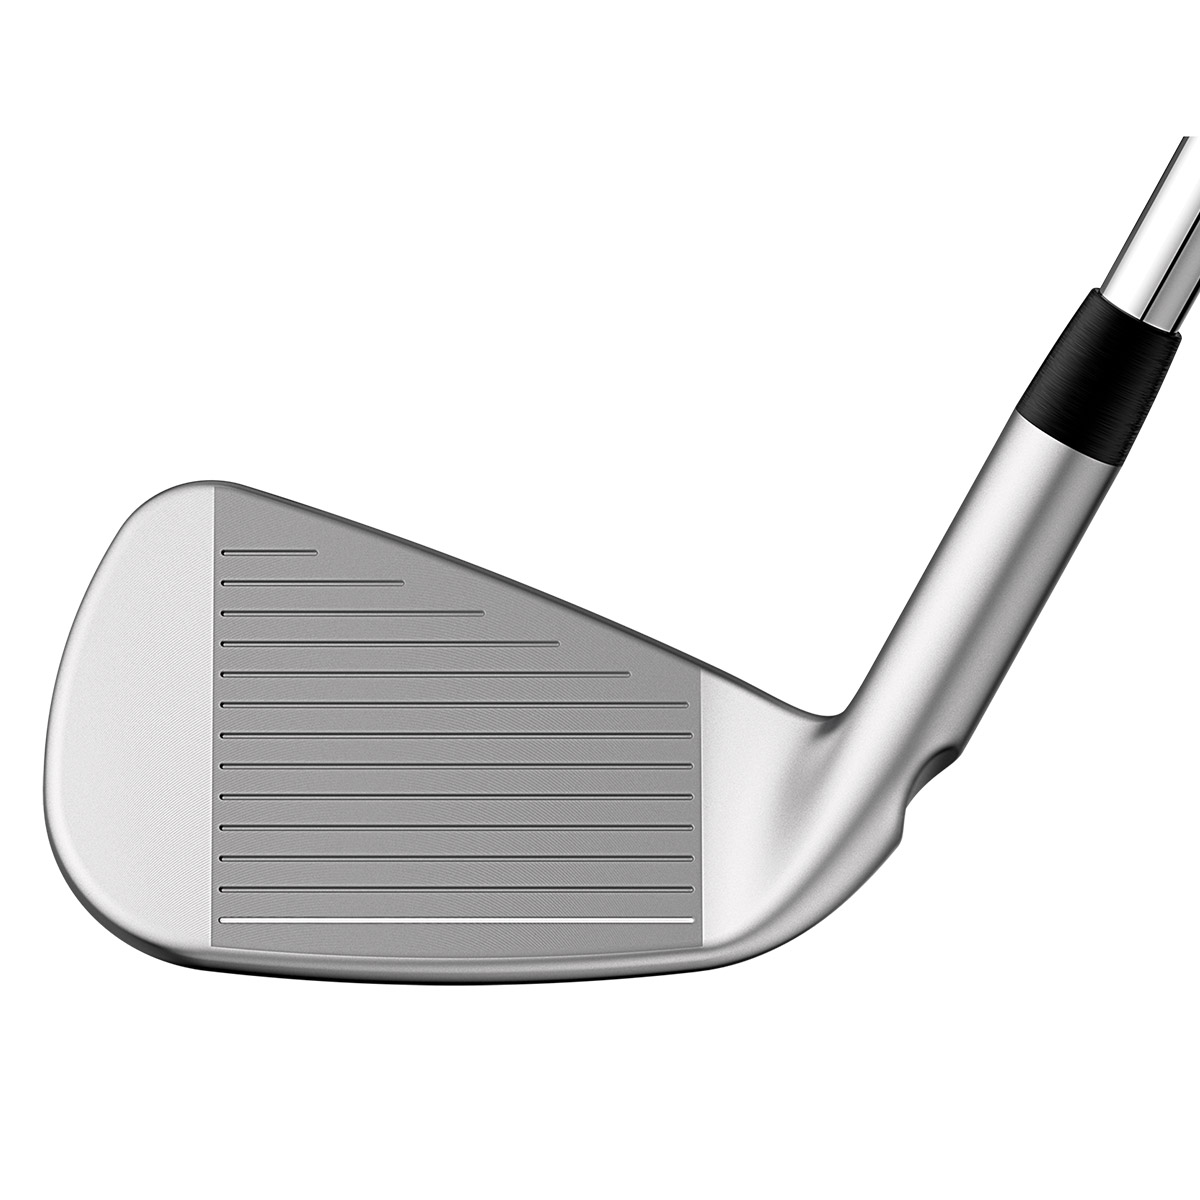 PING i210 Steel Irons from american golf